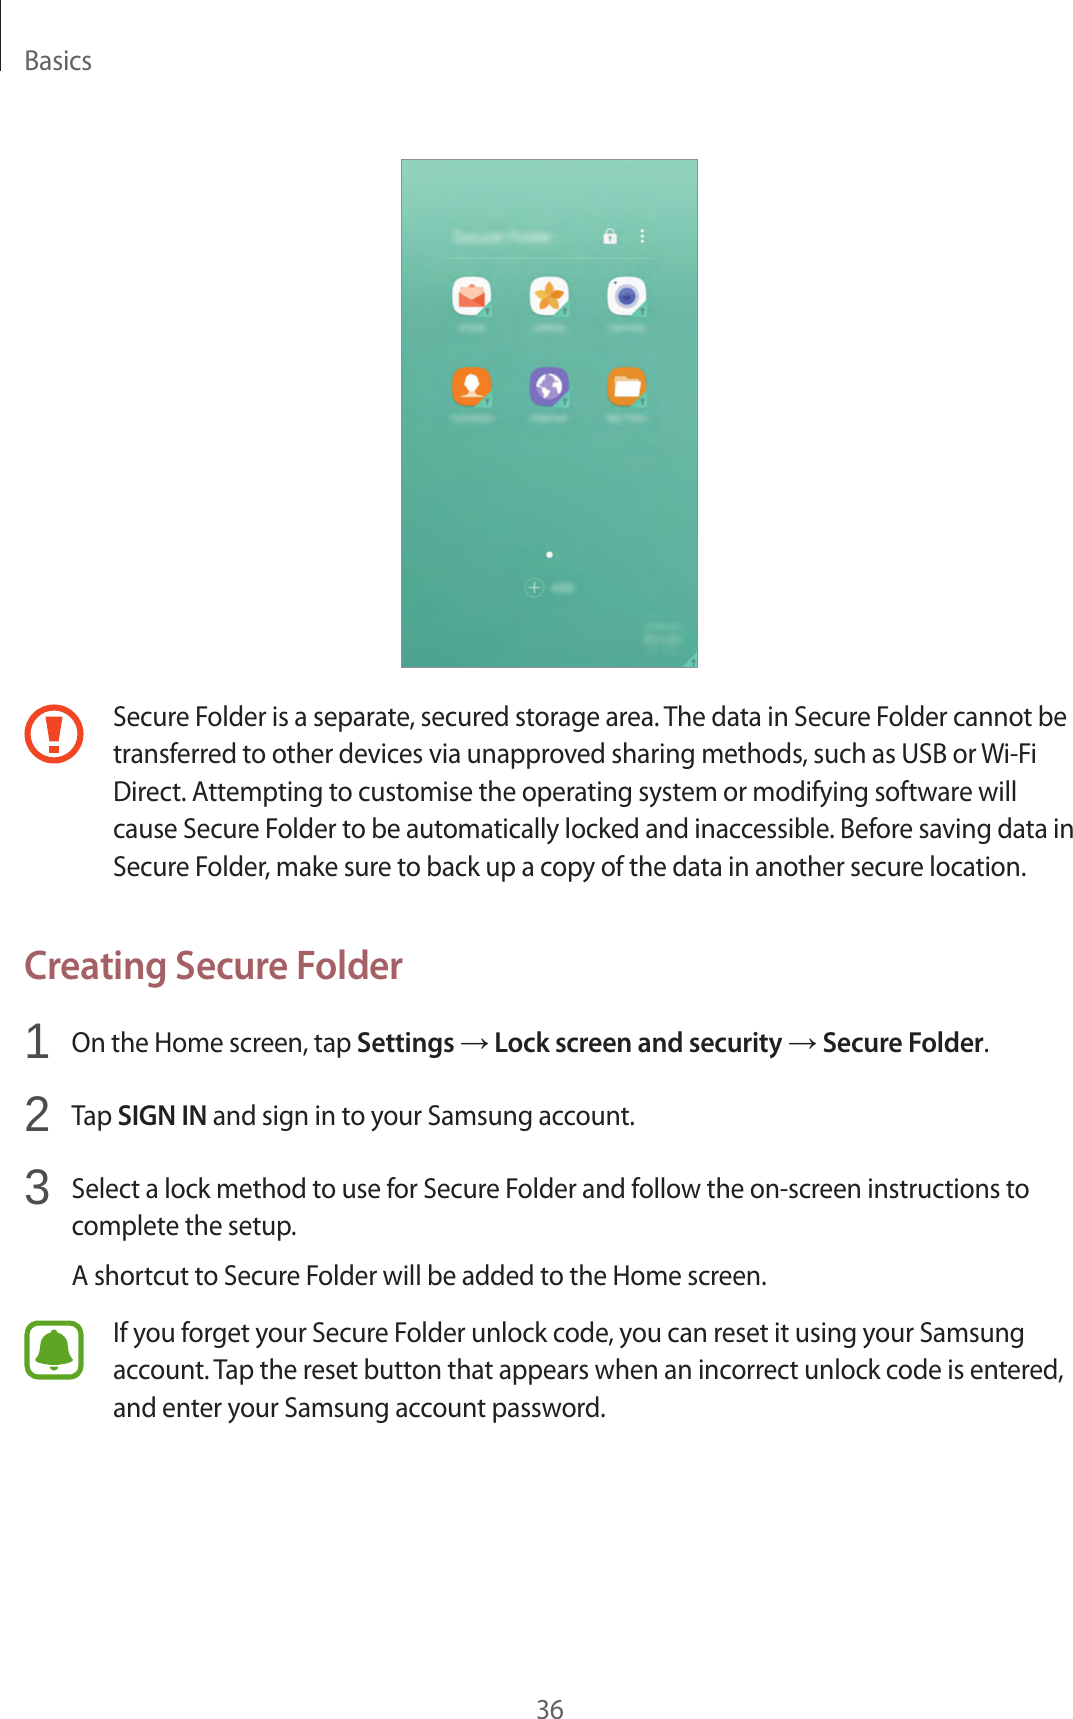 Basics36Secure Folder is a separate, secured storage area. The data in Secure Folder cannot be transferred to other devices via unapproved sharing methods, such as USB or Wi-Fi Direct. Attempting to customise the operating system or modifying software will cause Secure Folder to be automatically locked and inaccessible. Before saving data in Secure Folder, make sure to back up a copy of the data in another secure location.Creating Secure Folder1  On the Home screen, tap Settings → Lock screen and security → Secure Folder.2  Tap SIGN IN and sign in to your Samsung account.3  Select a lock method to use for Secure Folder and follow the on-screen instructions to complete the setup.A shortcut to Secure Folder will be added to the Home screen.If you forget your Secure Folder unlock code, you can reset it using your Samsung account. Tap the reset button that appears when an incorrect unlock code is entered, and enter your Samsung account password.